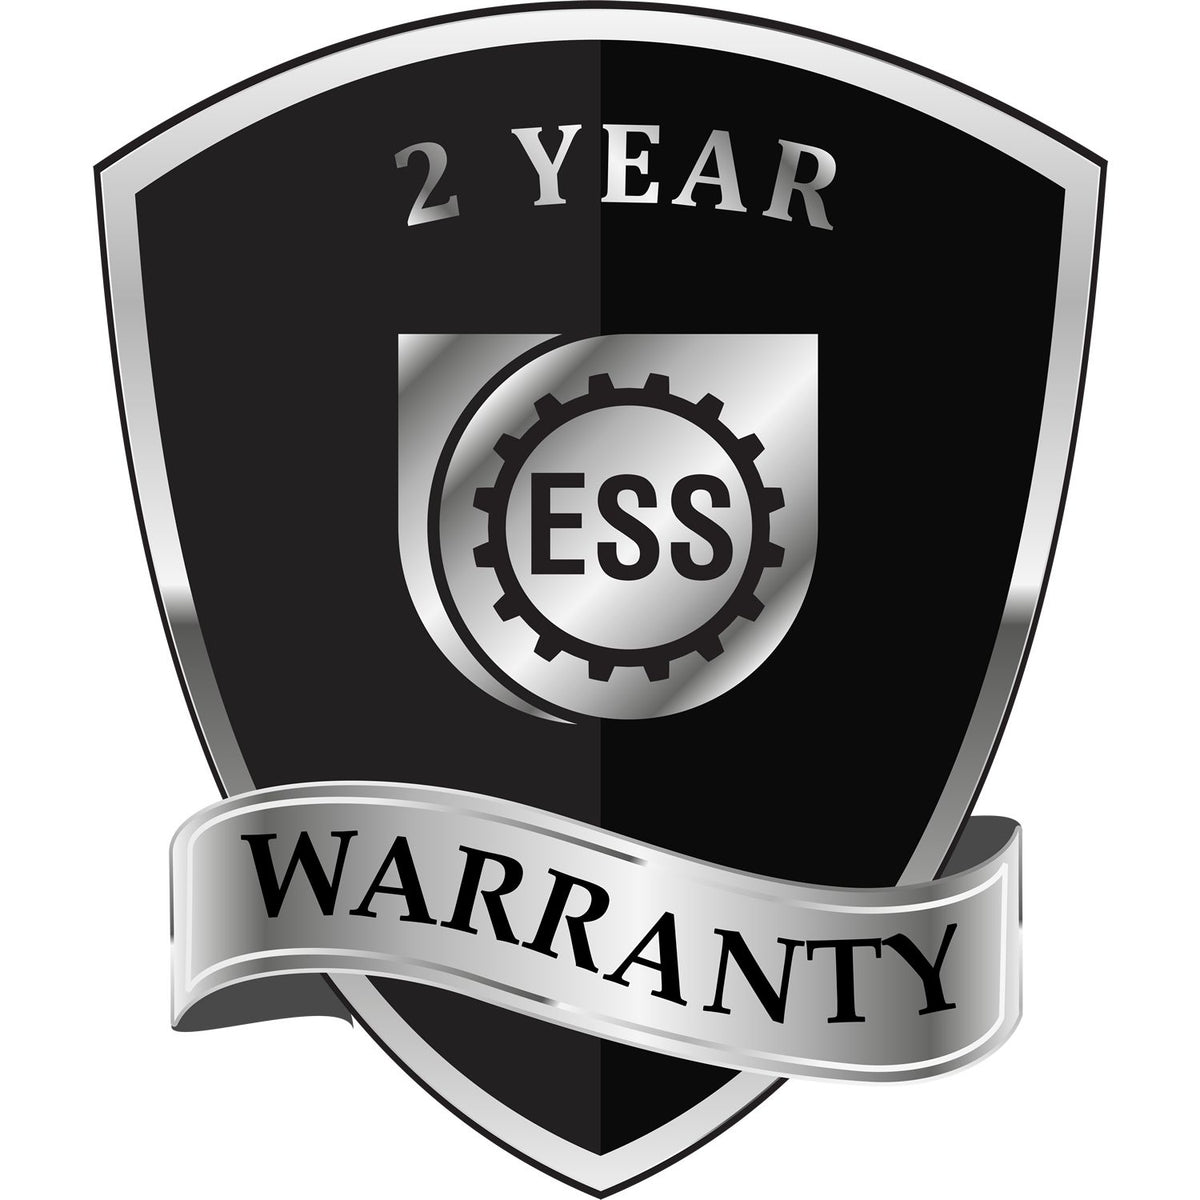 A black and silver badge or emblem showing warranty information for the Heavy Duty Cast Iron Kansas Geologist Seal Embosser